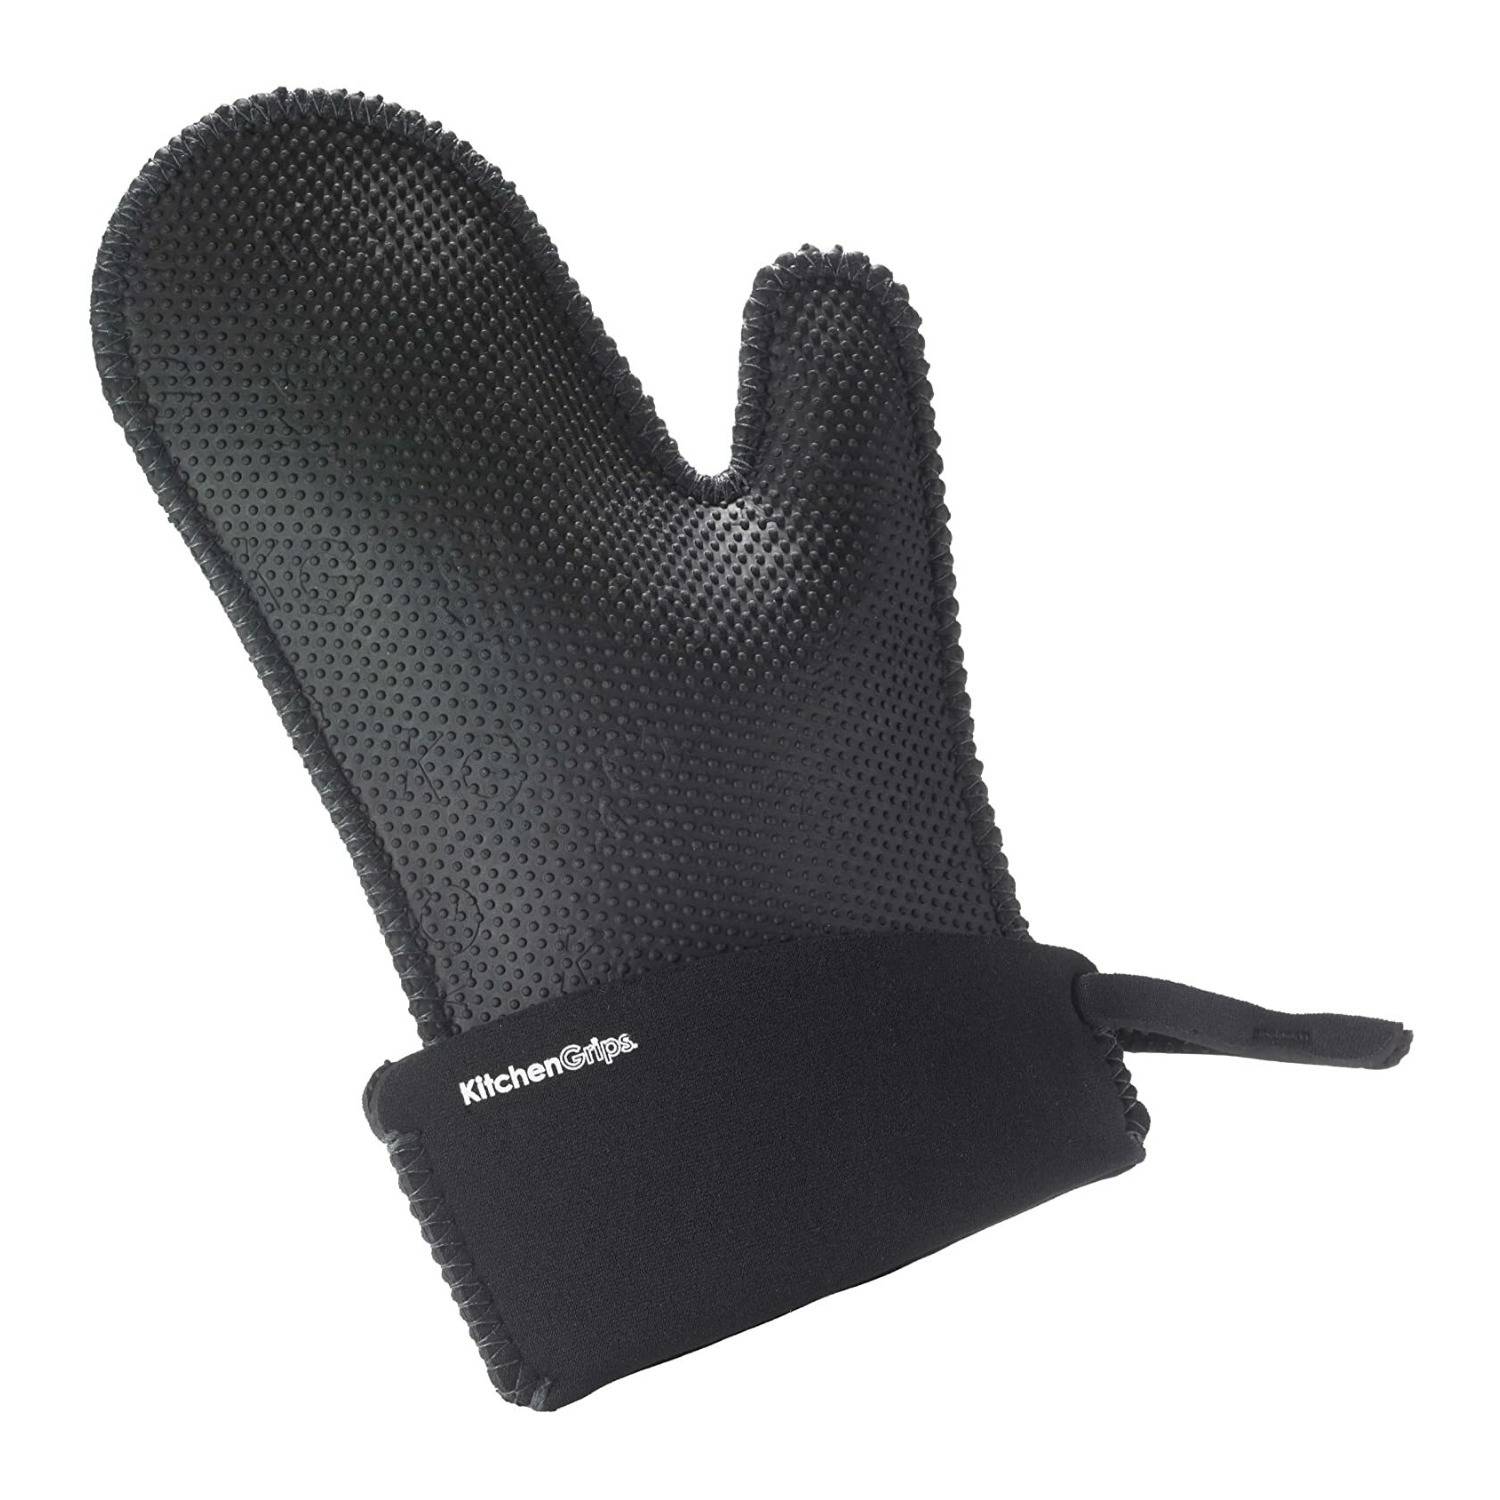 Browne and Company Kitchen Grips Chef's Mitt (Large, Black)